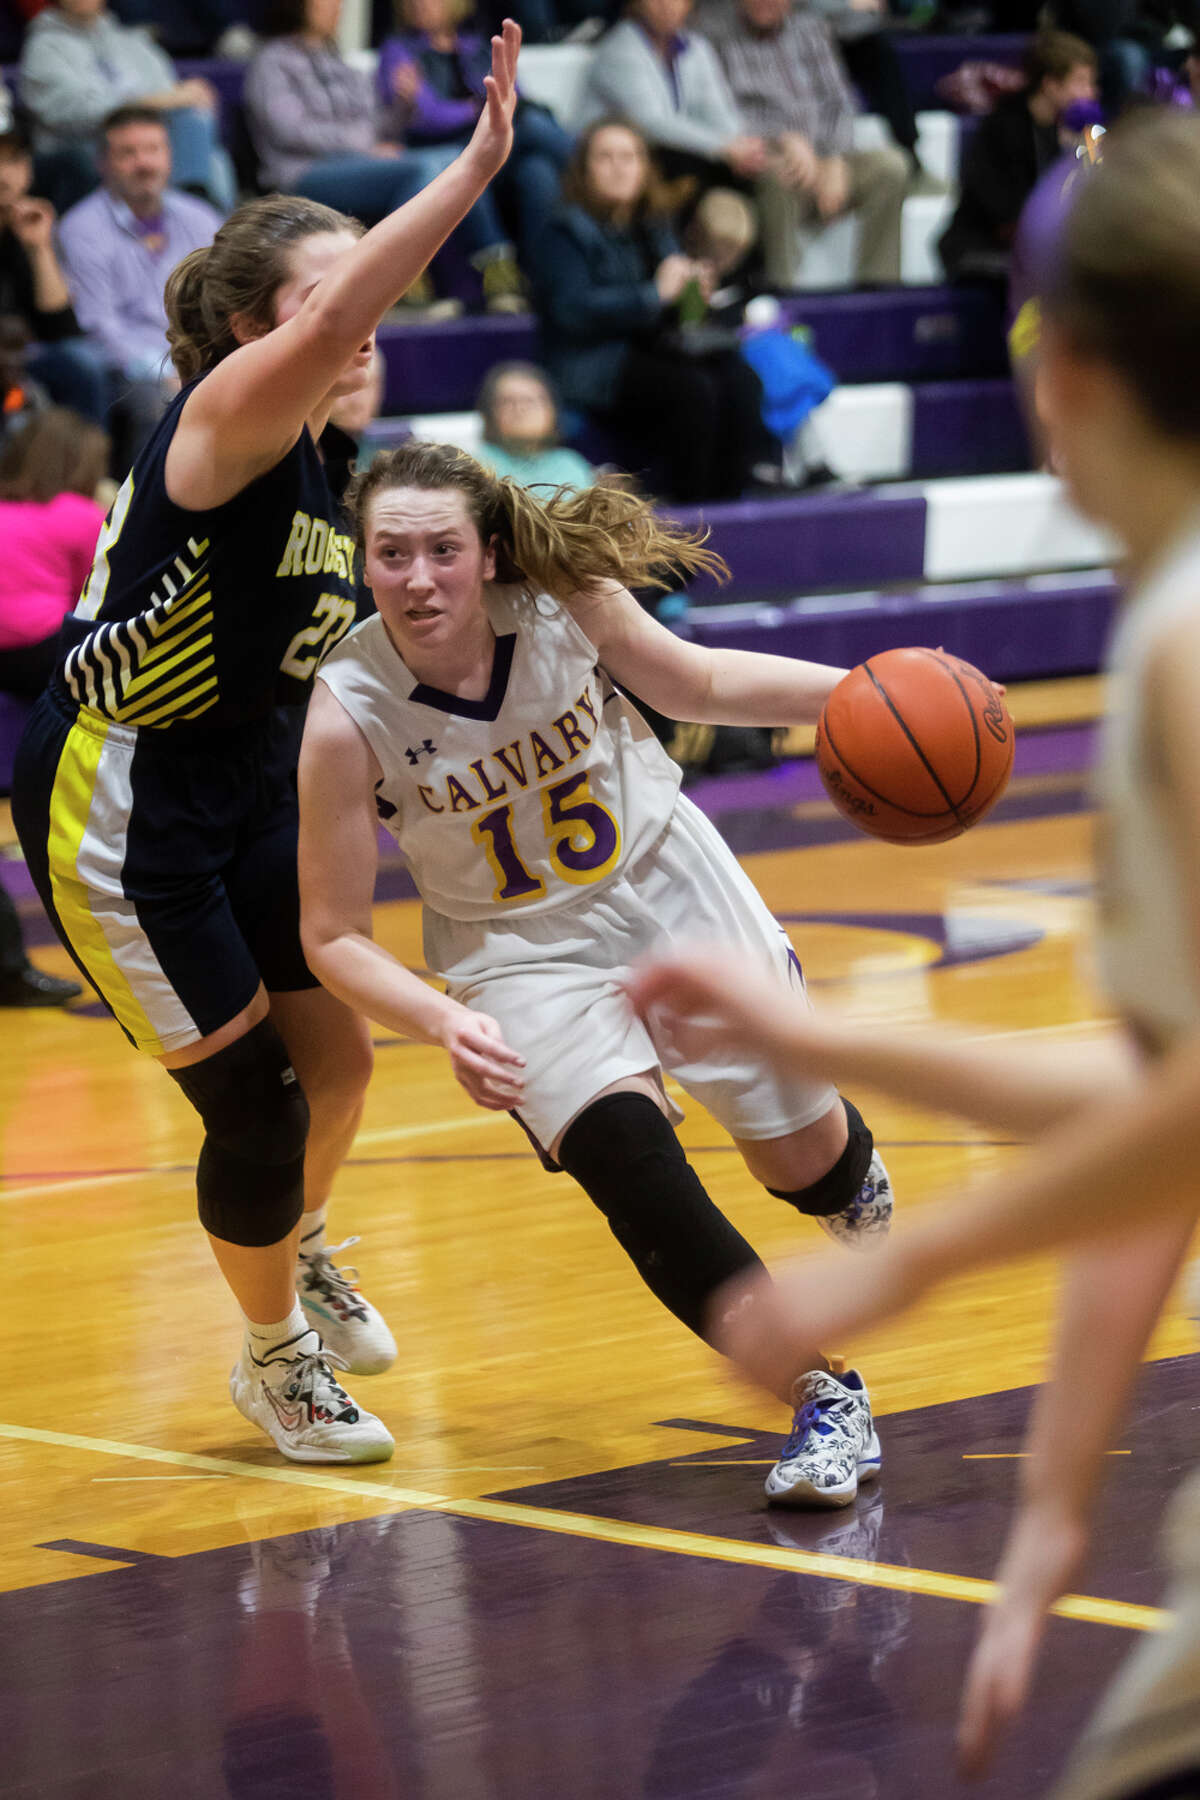 CBA's Caitlyn Dickerson drives to the rim during a Feb. 11, 2022 game against Rochester Hills Christian. Dickerson scored 23 points in Friday's win over Caseville.